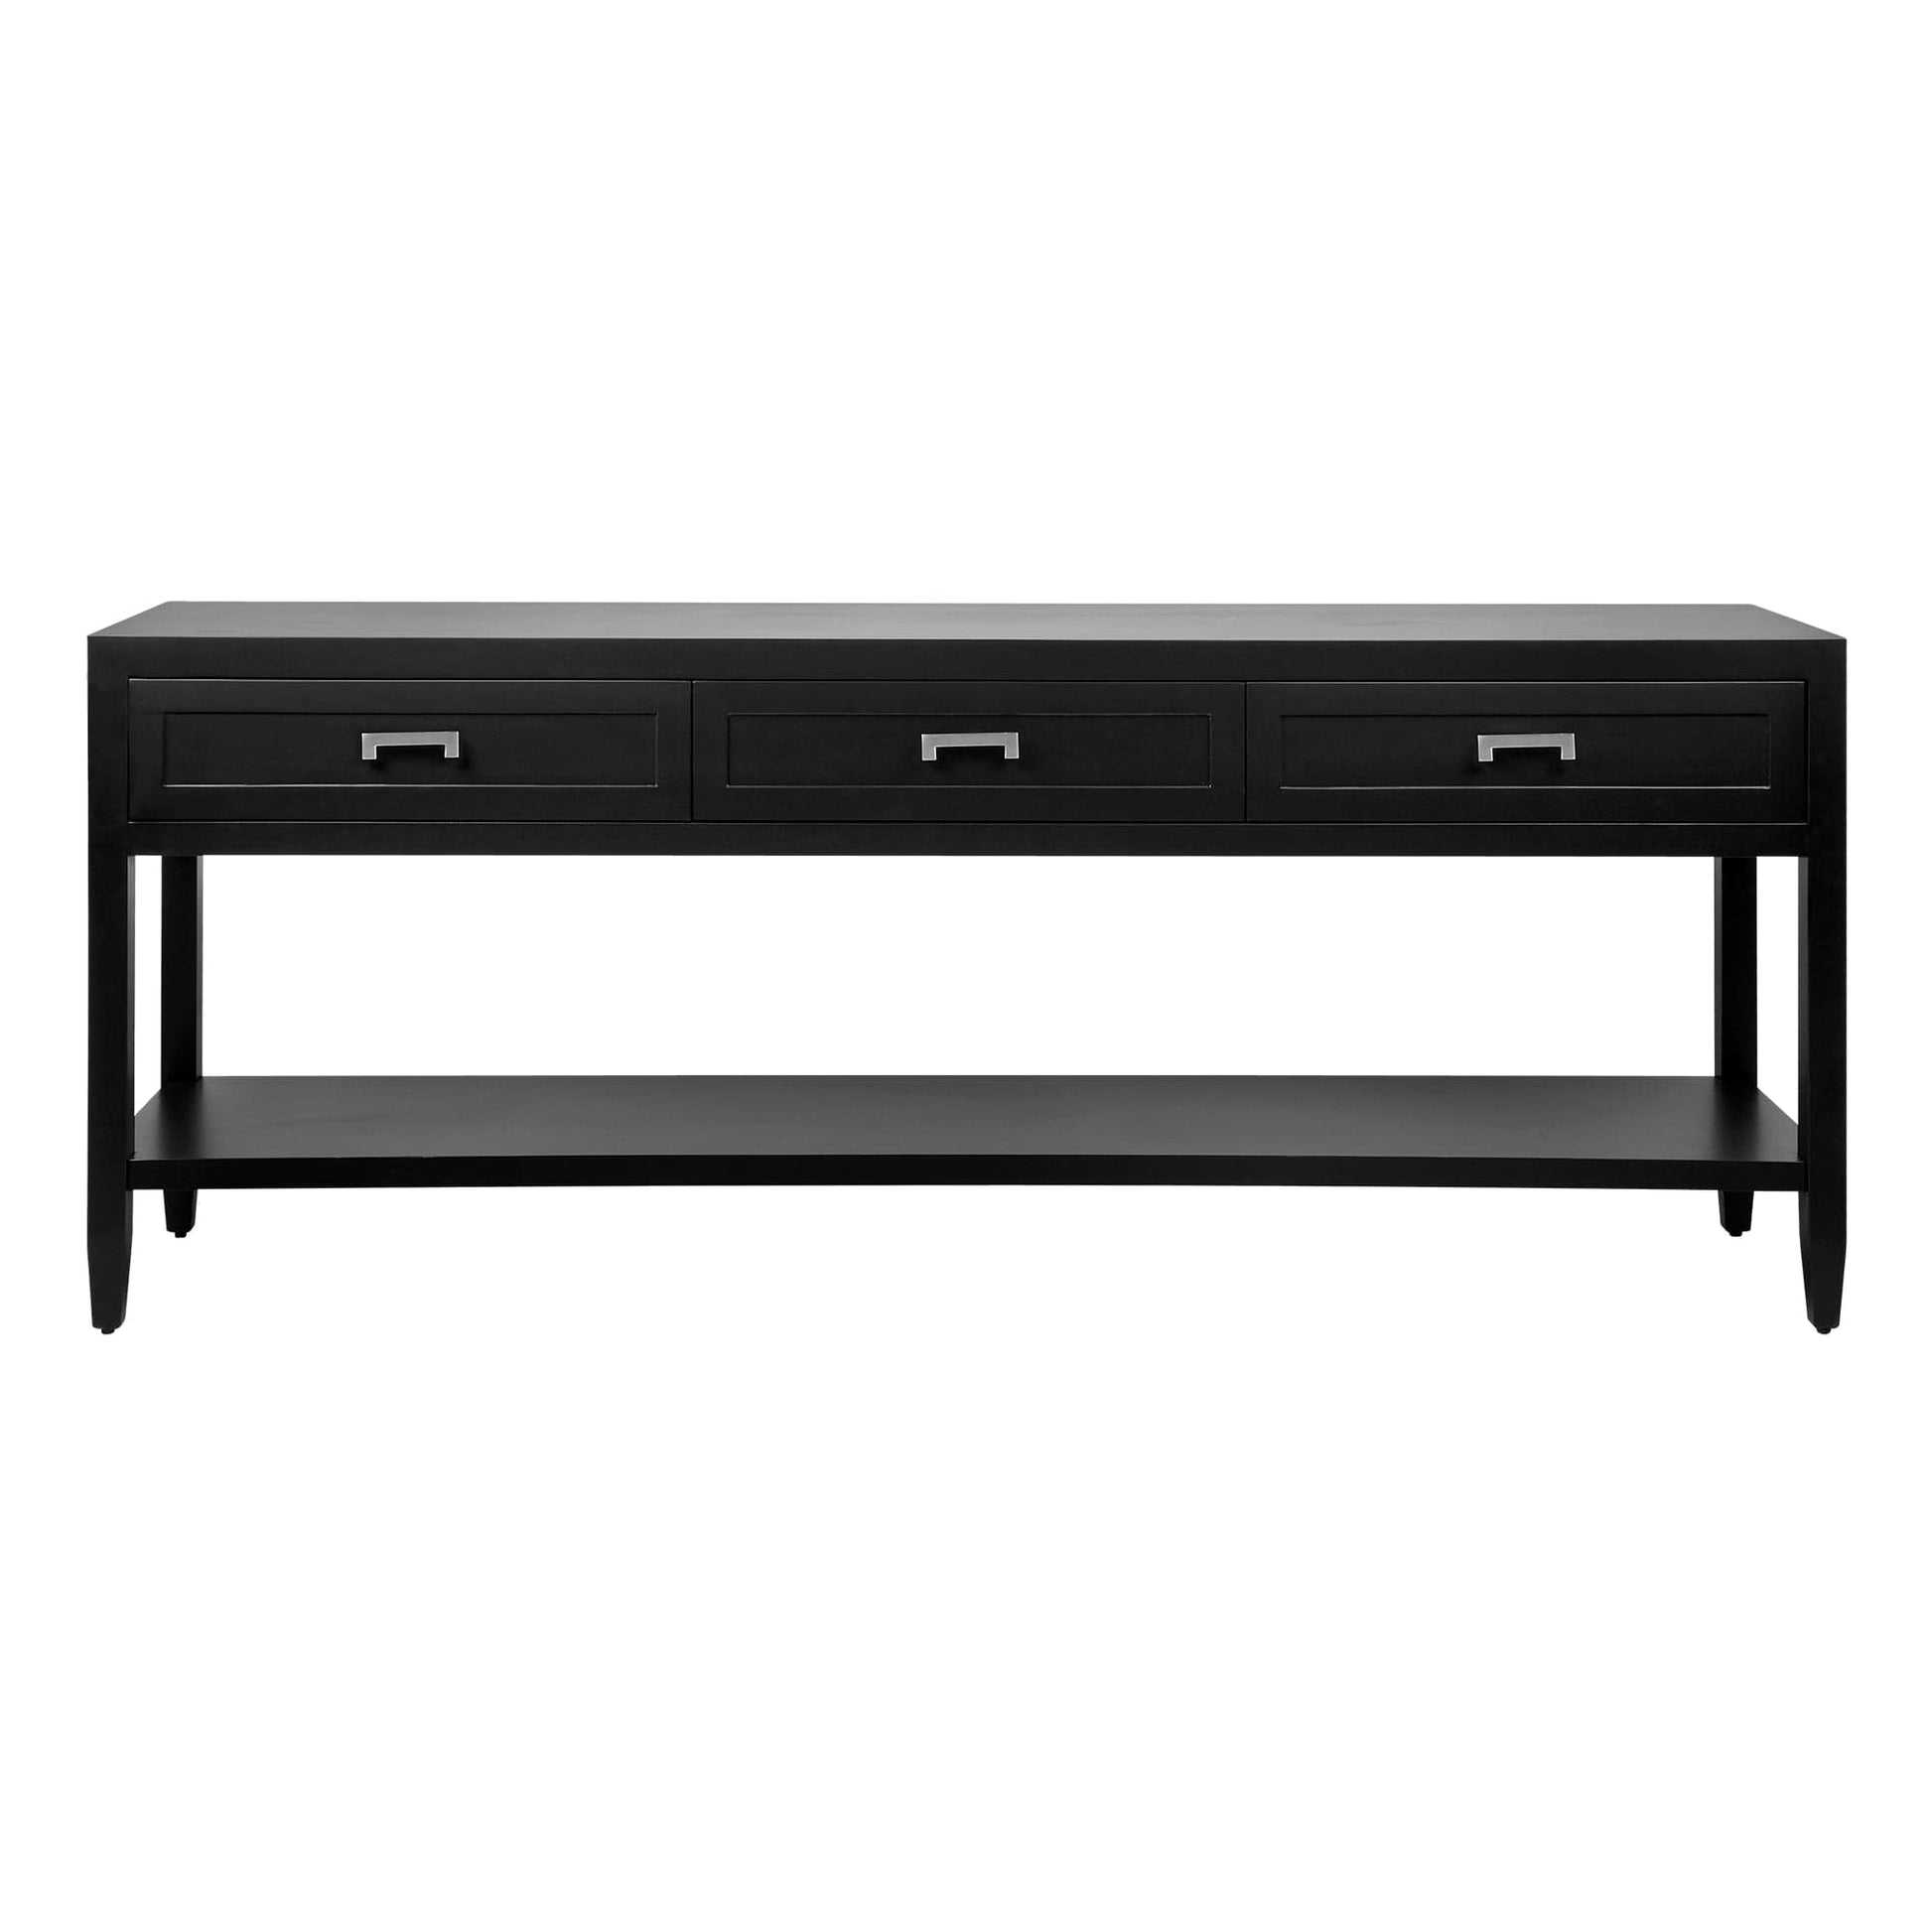 Cafe Lighting & Living Soloman Console Table - Large Black